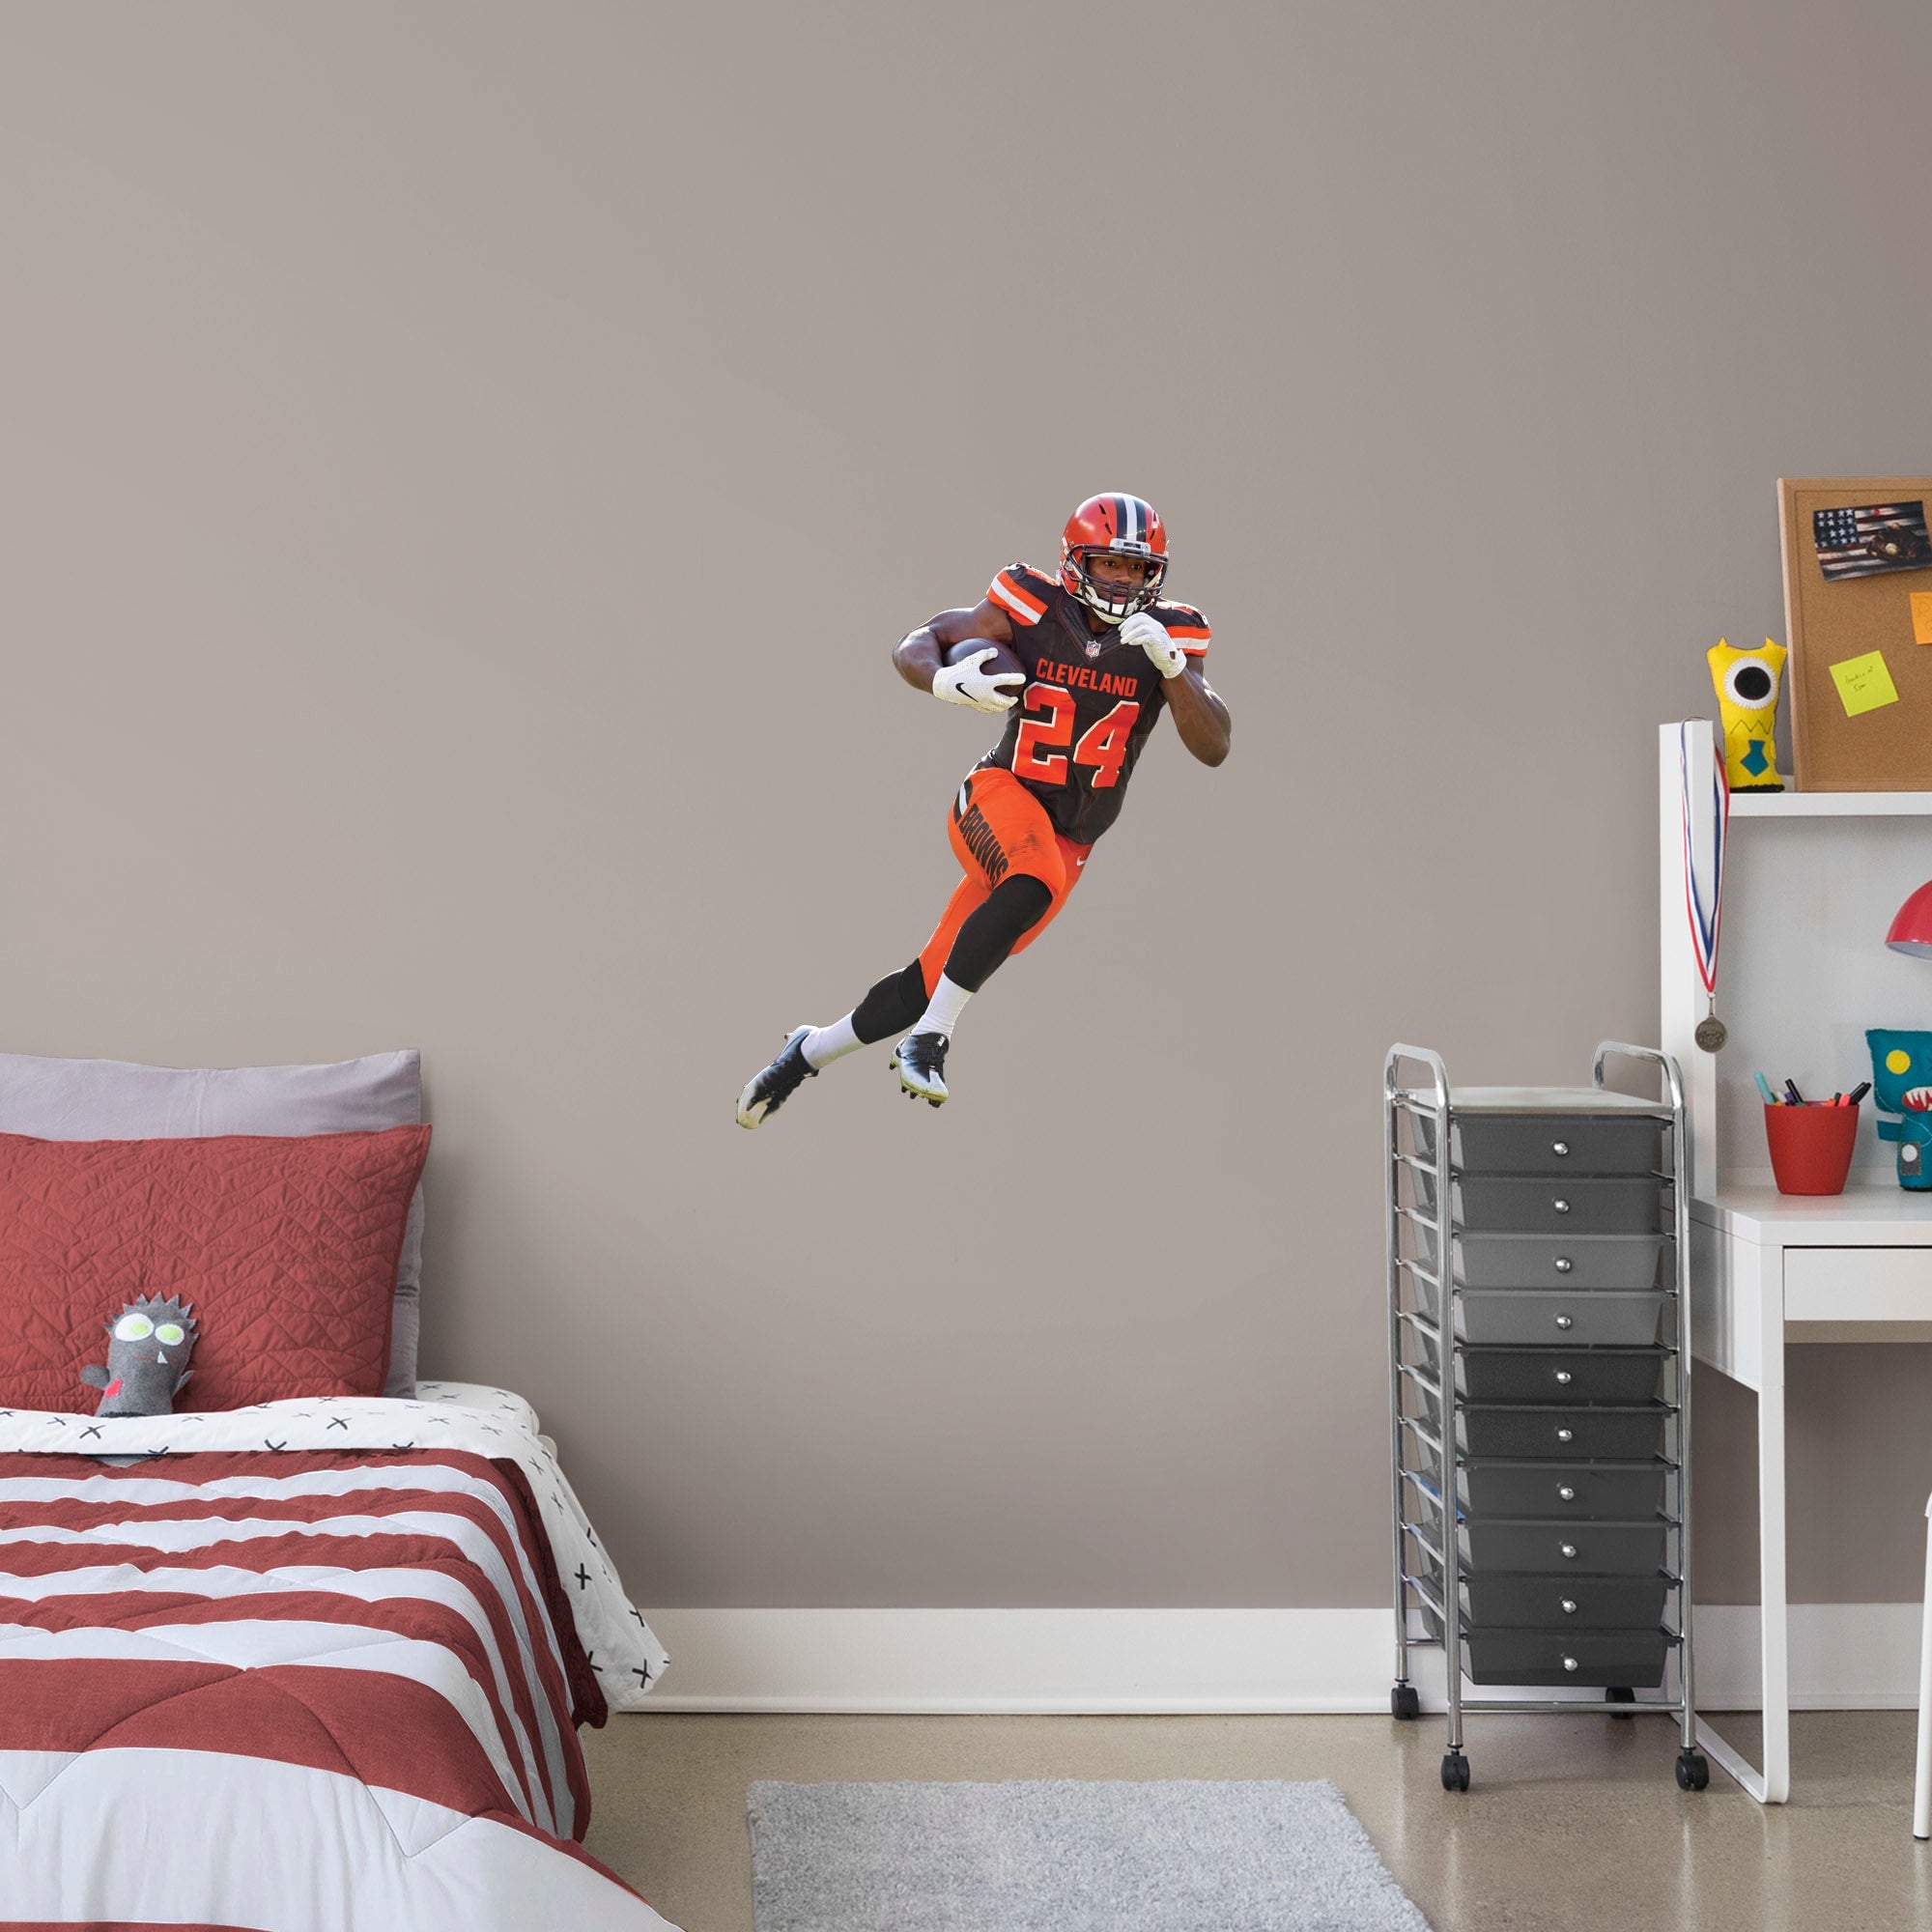 Nick Chubb for Cleveland Browns - Officially Licensed NFL Removable Wall Decal Giant Athlete + 2 Decals (37"W x 48"H) by Fathead